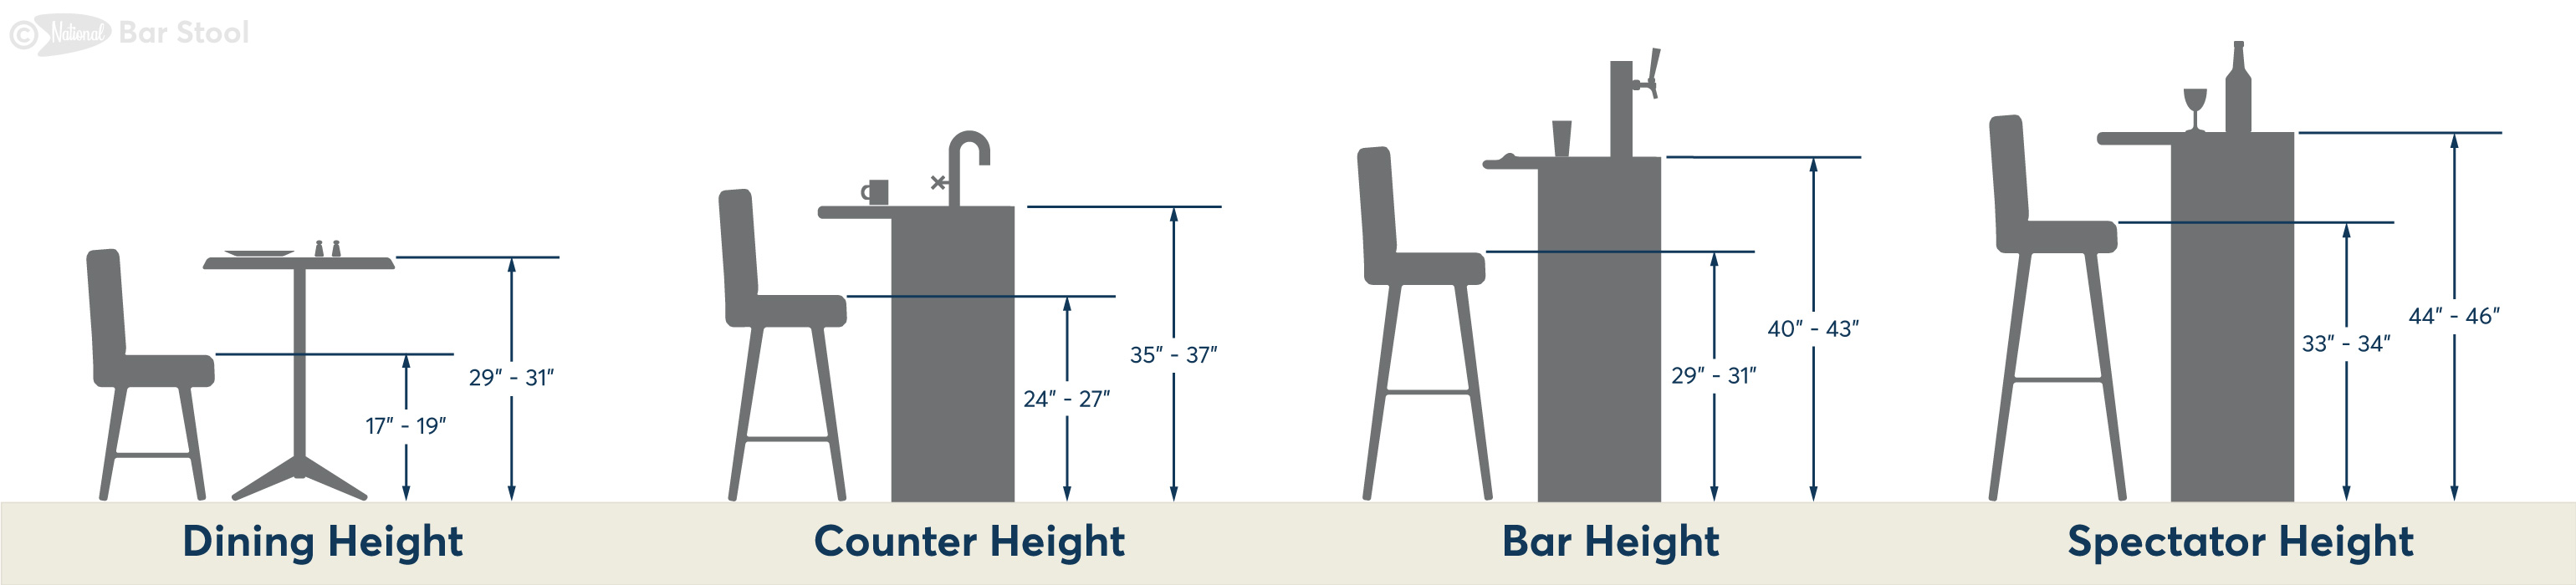 Bar Stool Ing Guide National, How To Determine What Size Bar Stool